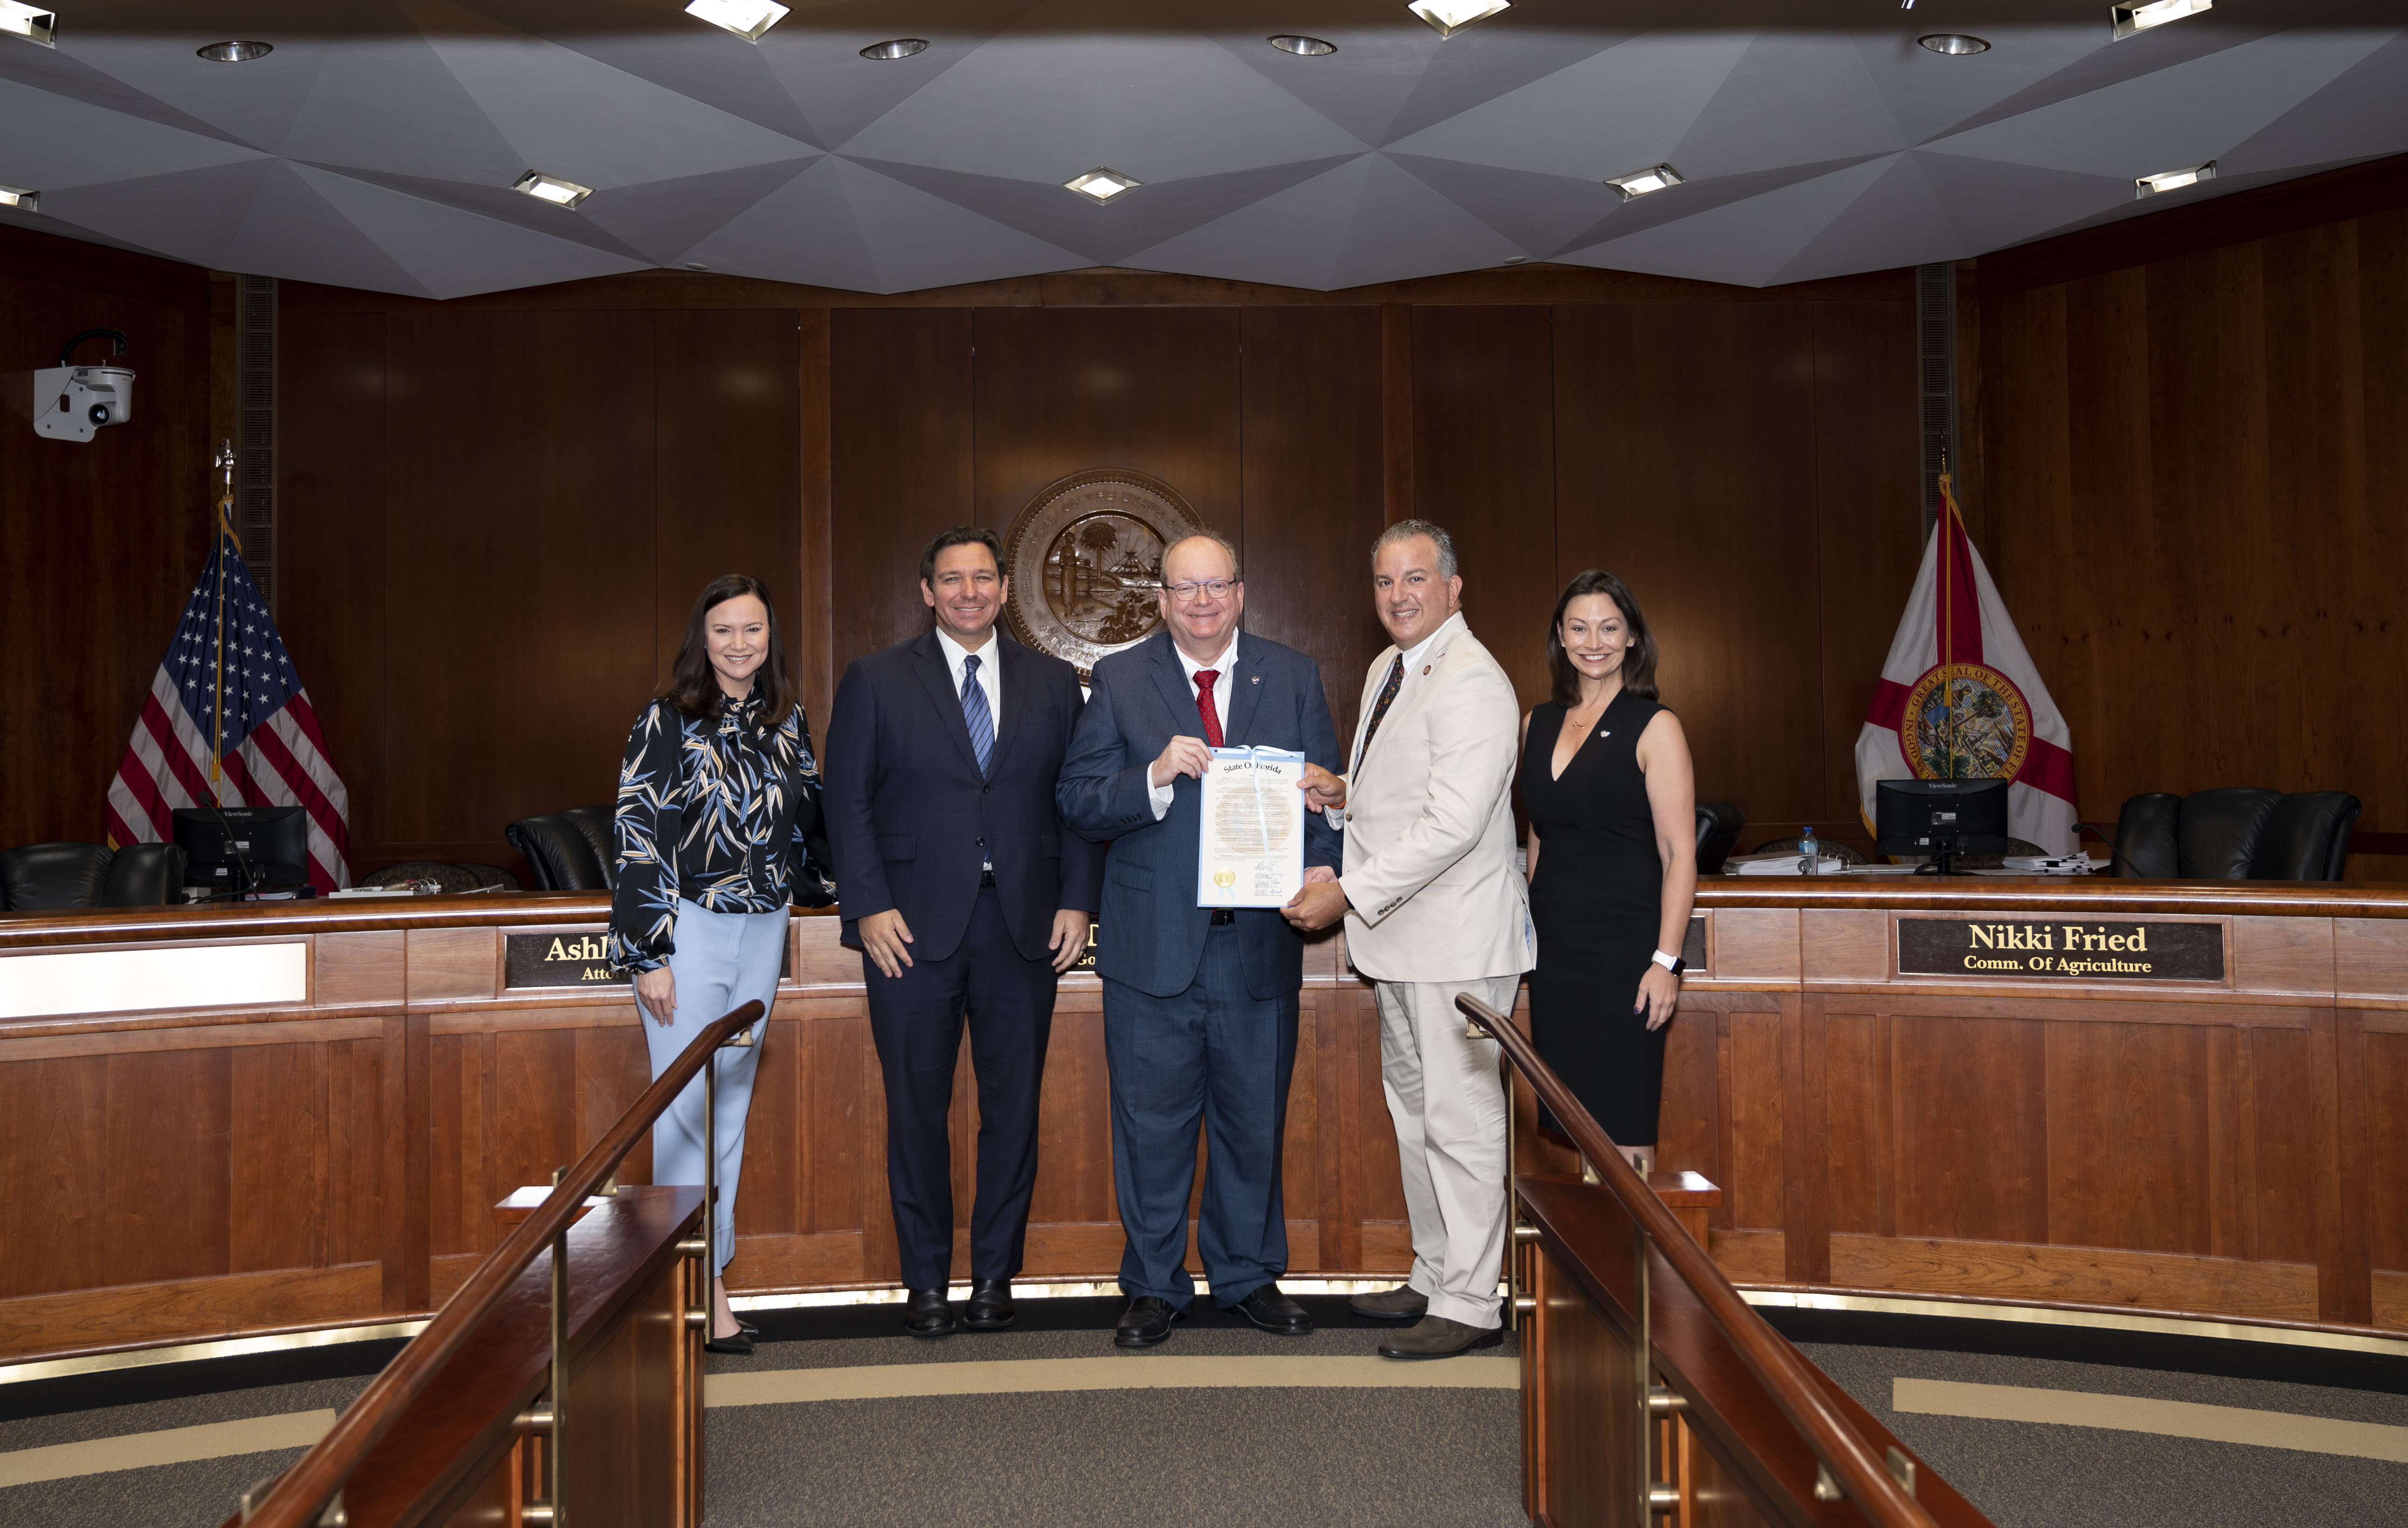 Jimmy Patronis presented a resolution celebrating the 60th anniversary of the NASA Kennedy Space Center